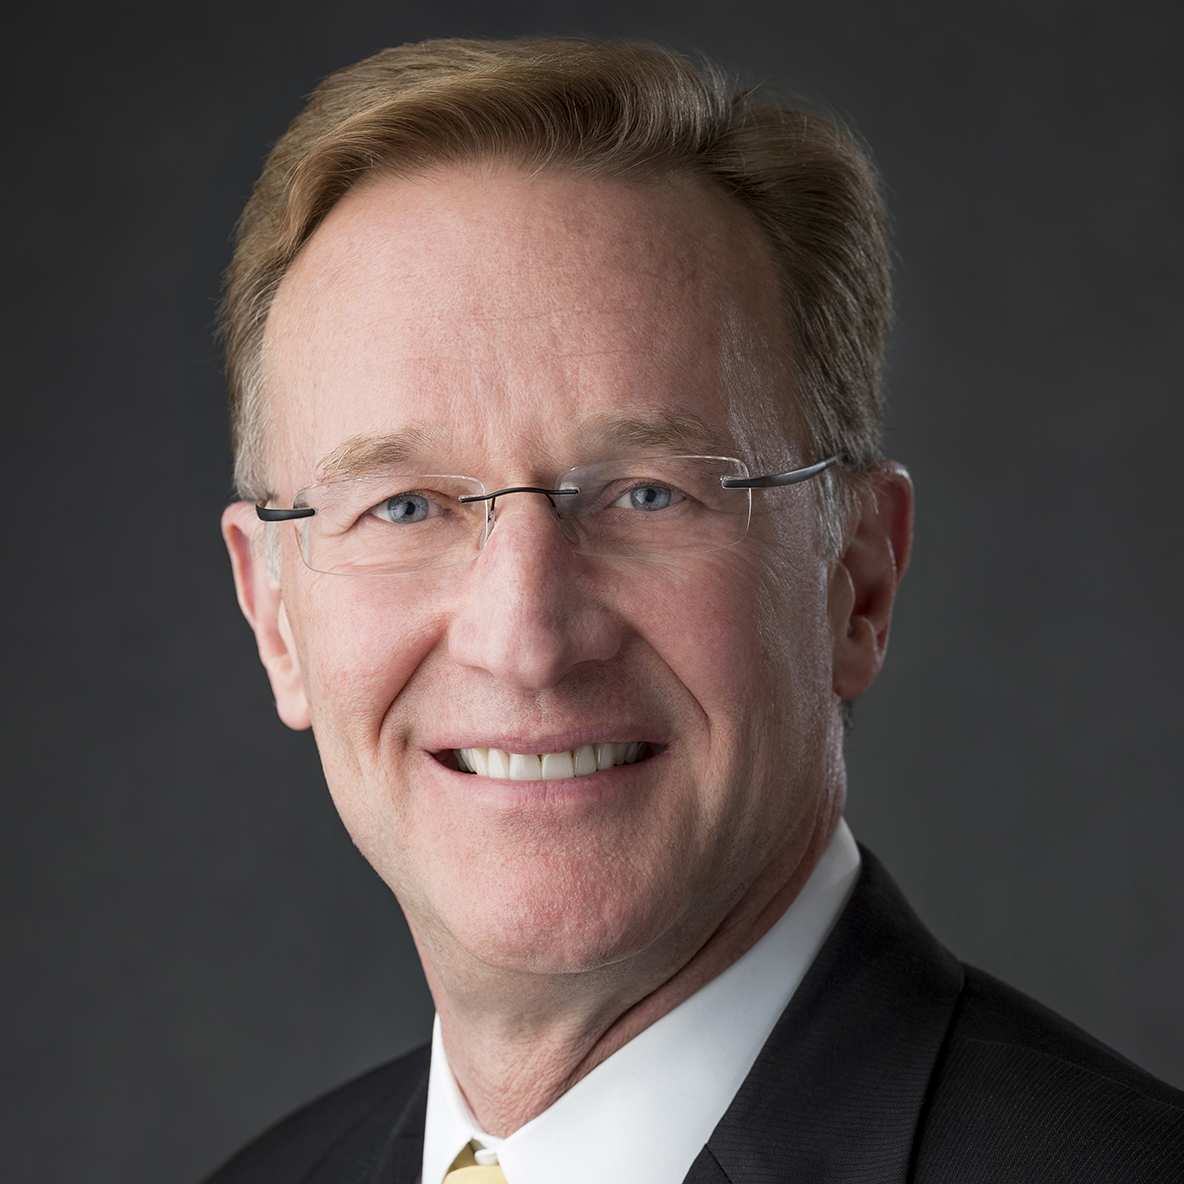 Wendell Weeks, Chairman and Chief Executive Officer